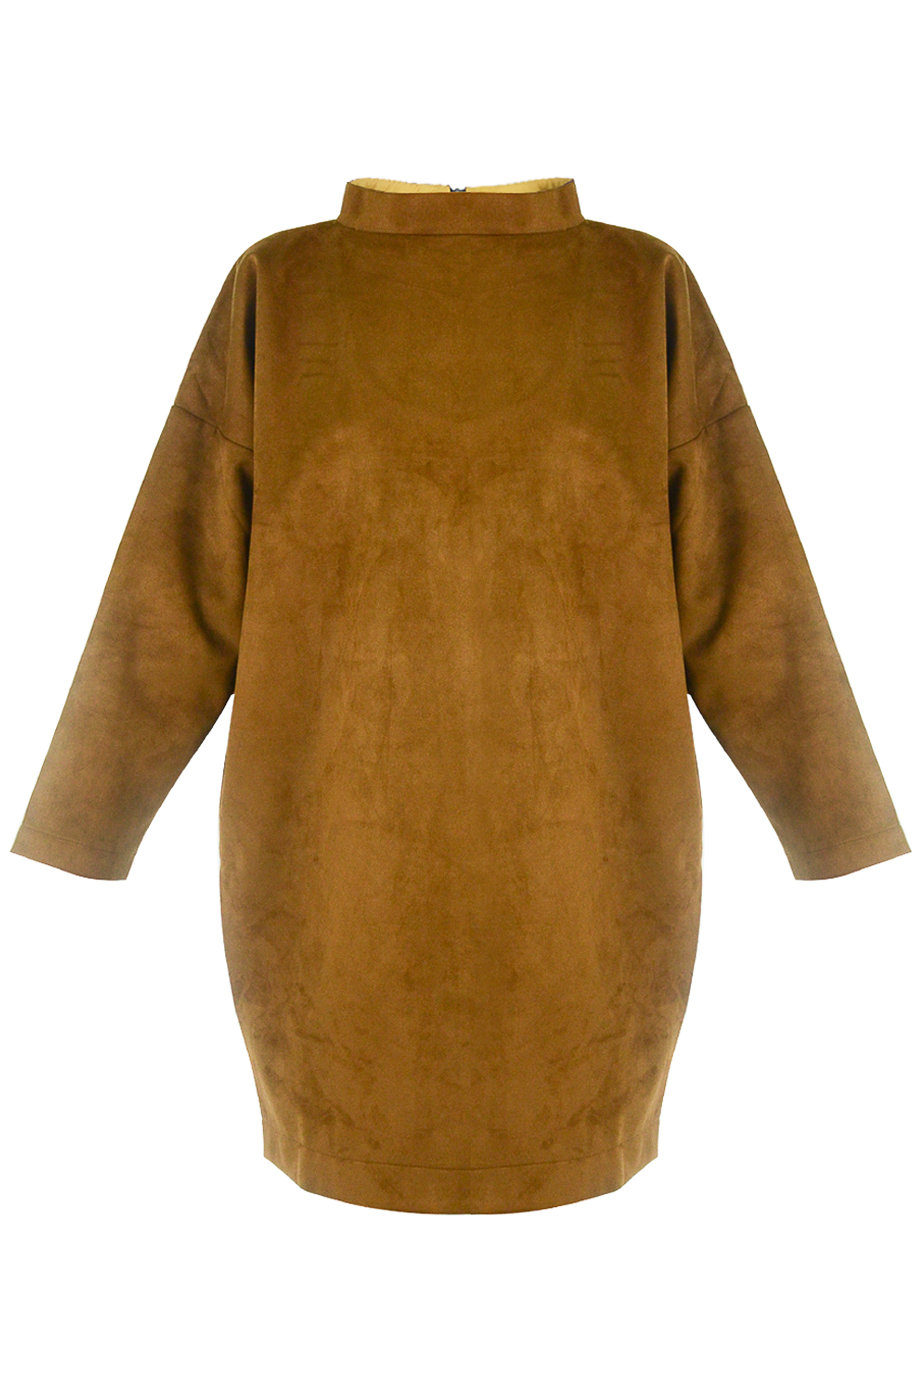 Đầm mini Yves Suede Oversized Tunic Pullover/ Cowskin 2229